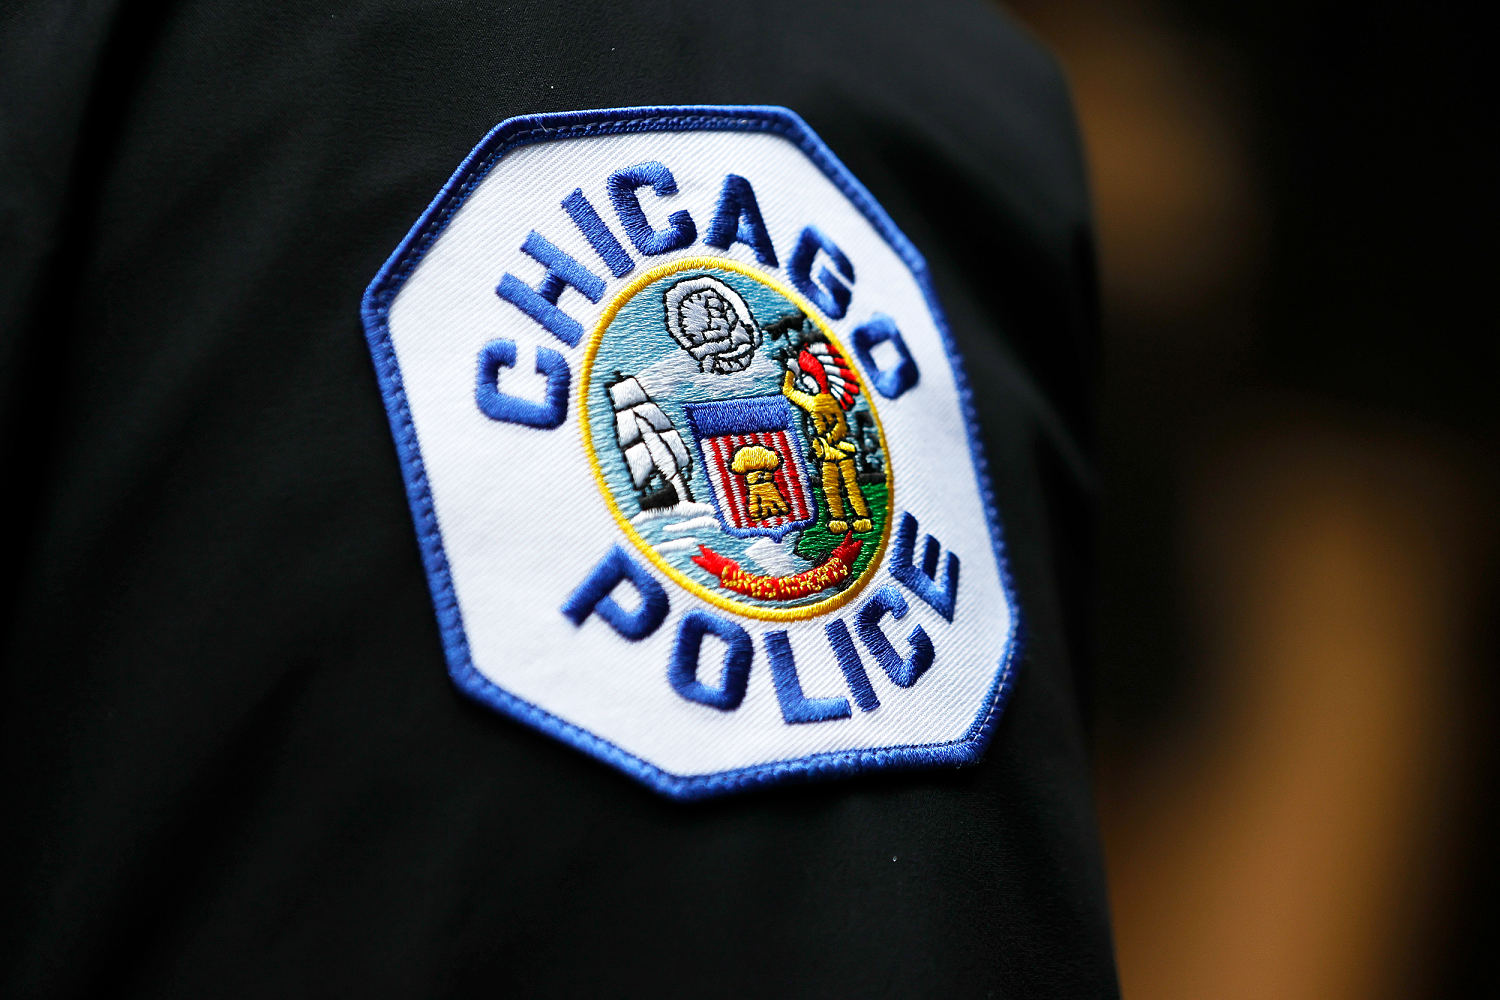 Ex Chicago police officer sentenced for forcing woman to perform sex act while on duty